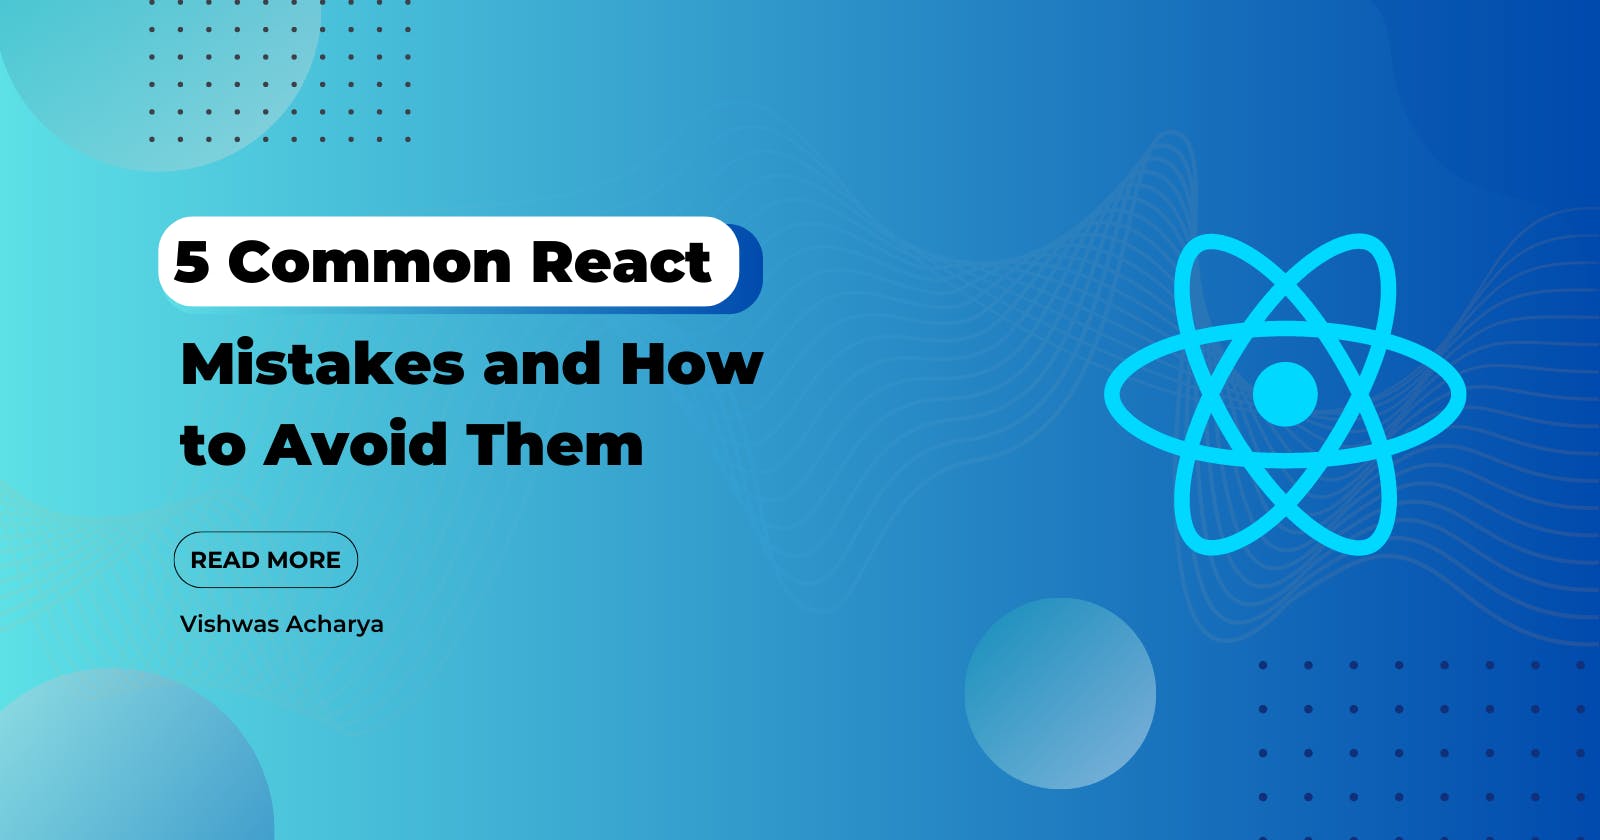 5 Common React Mistakes and How to Avoid Them